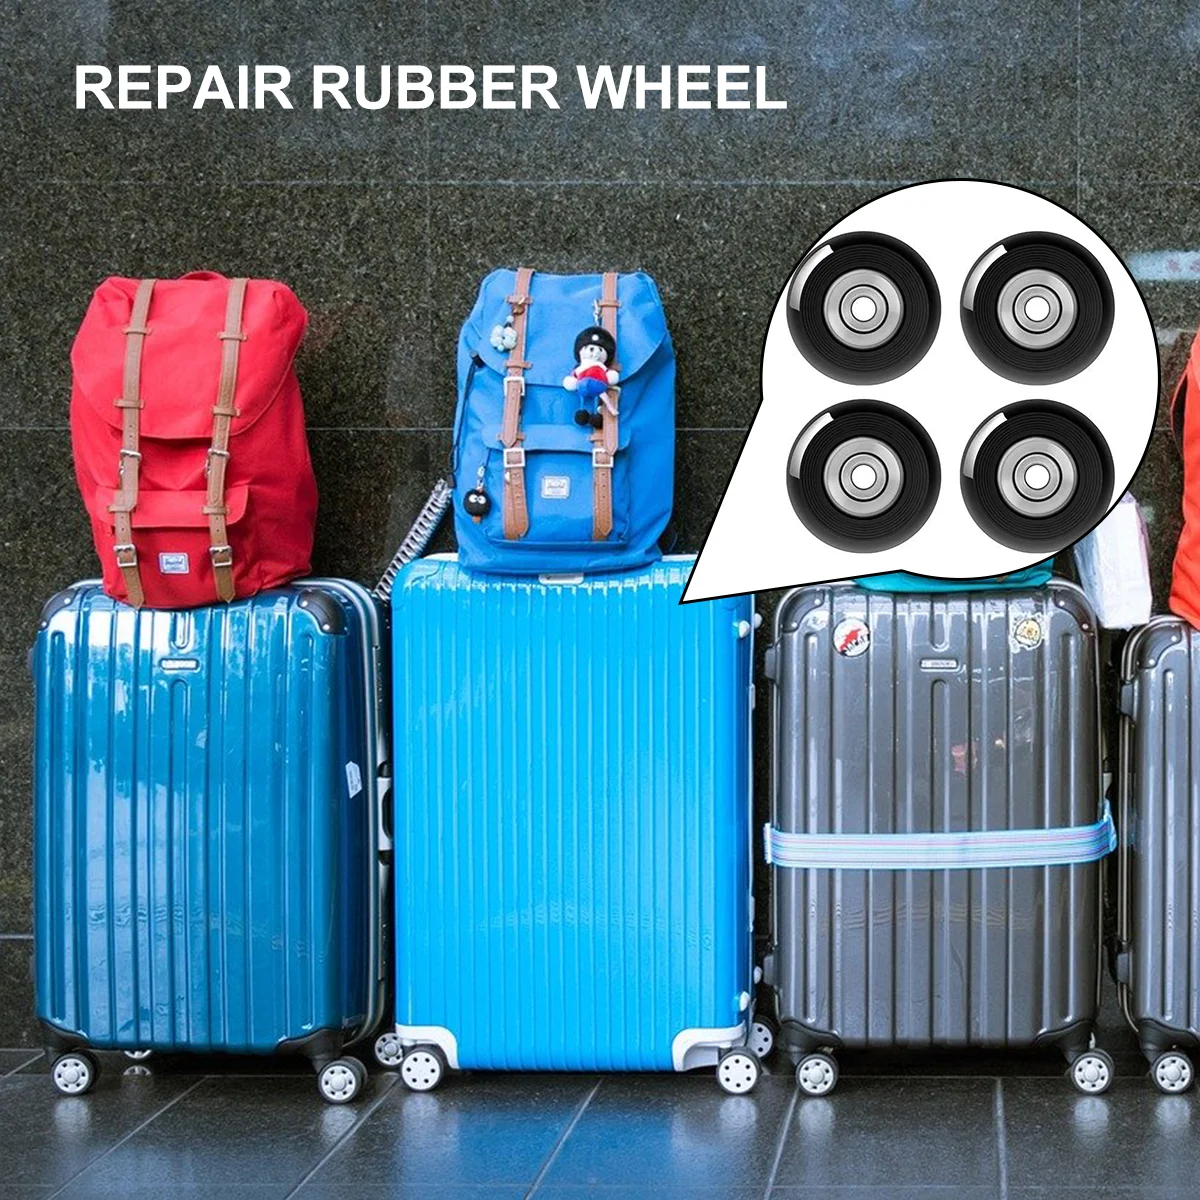 30 Pcs Roller Skates Accessories Travel Luggage Replacement Parts Plastic Repair Kit Rubber Wheel Wheels Suitcase